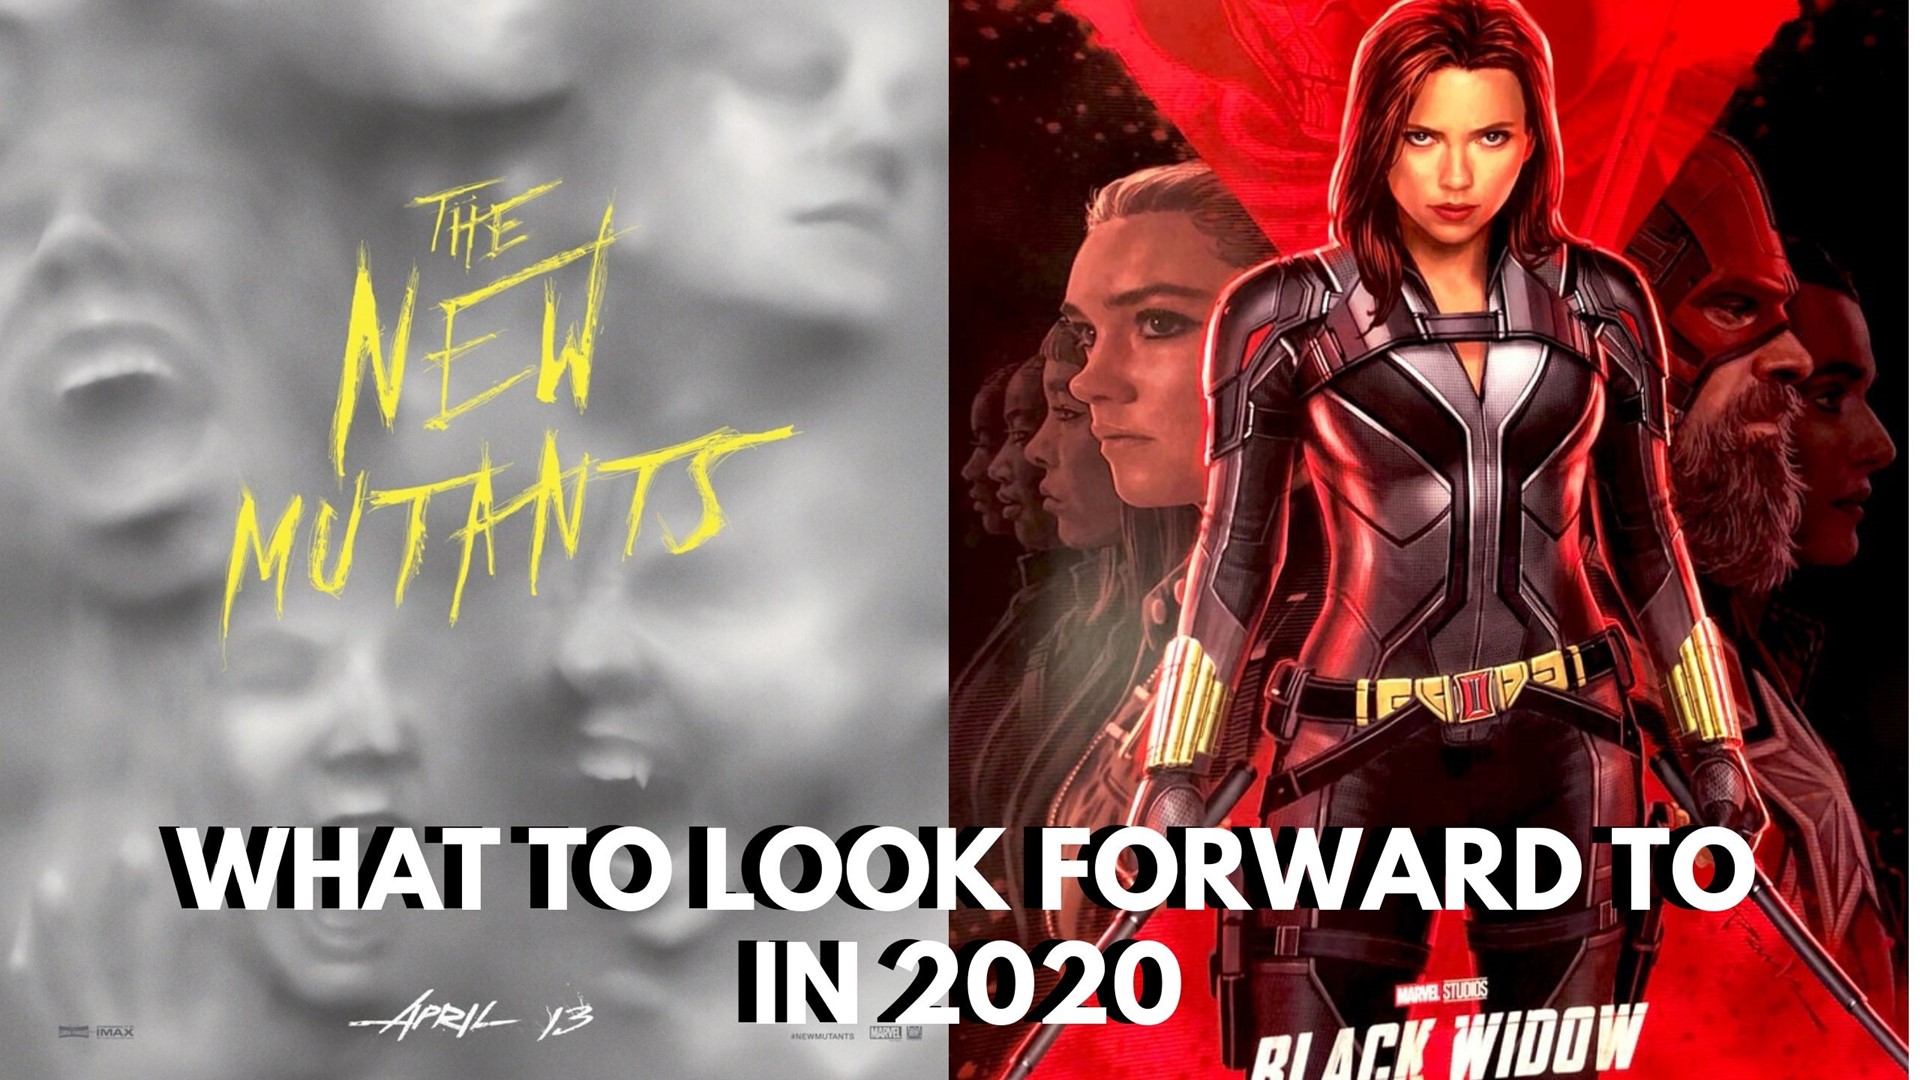 2019 was a great year for nerd things. Some things were incredible, some were a little dissapointing, but leave them in the past 2020 promises a great lineup.